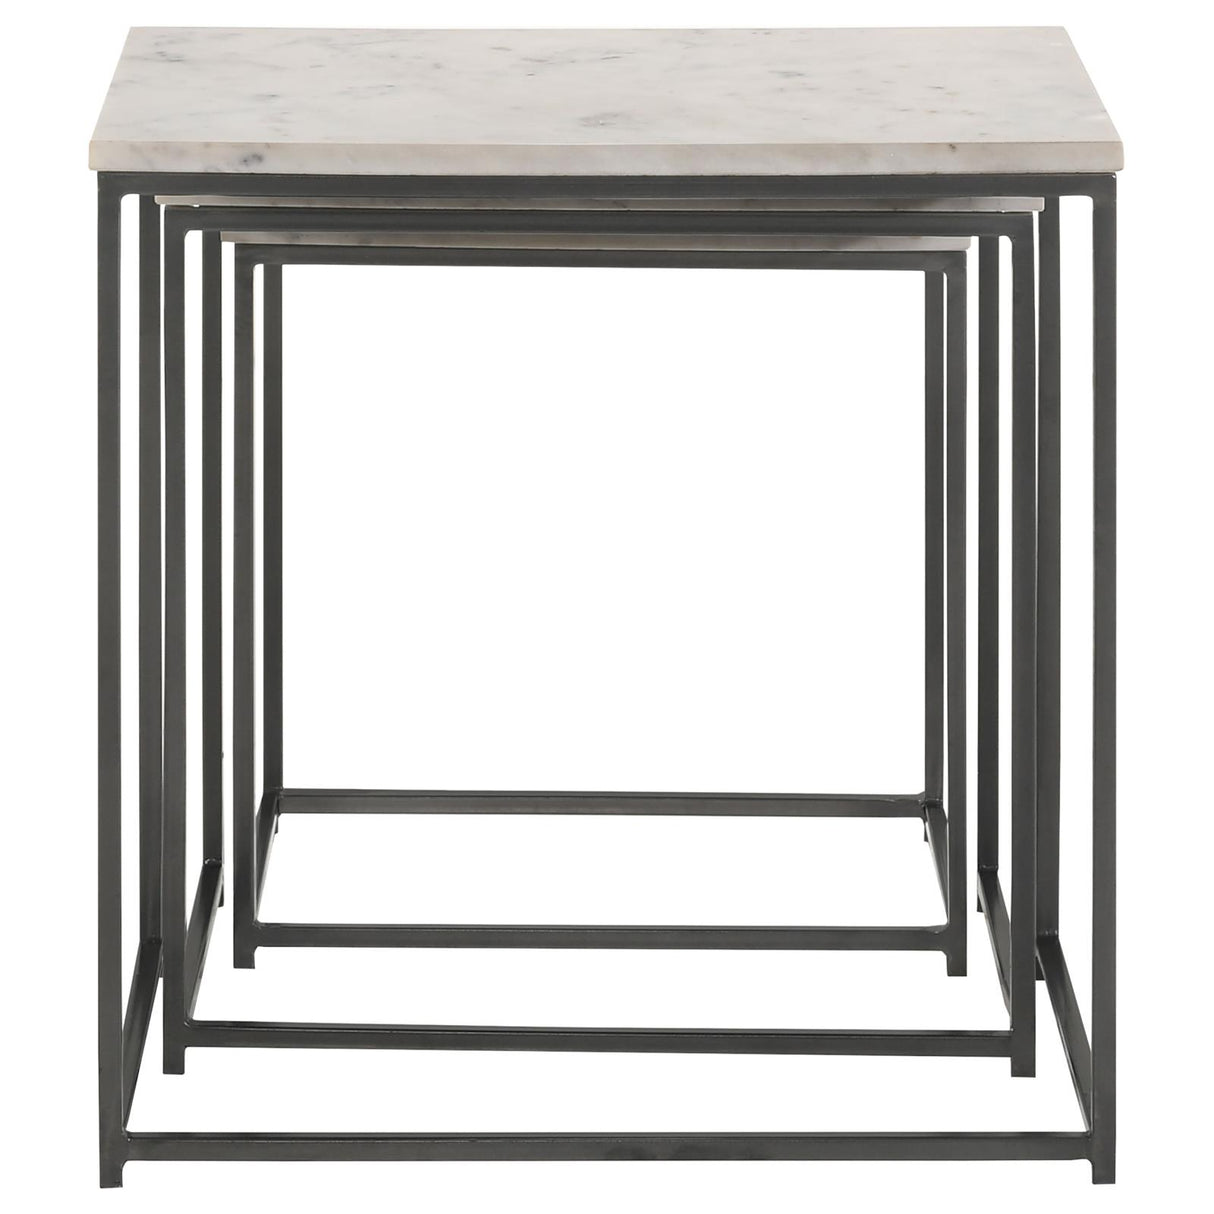 Caine 3-piece Nesting Table with Marble Top - 936016 - Luna Furniture